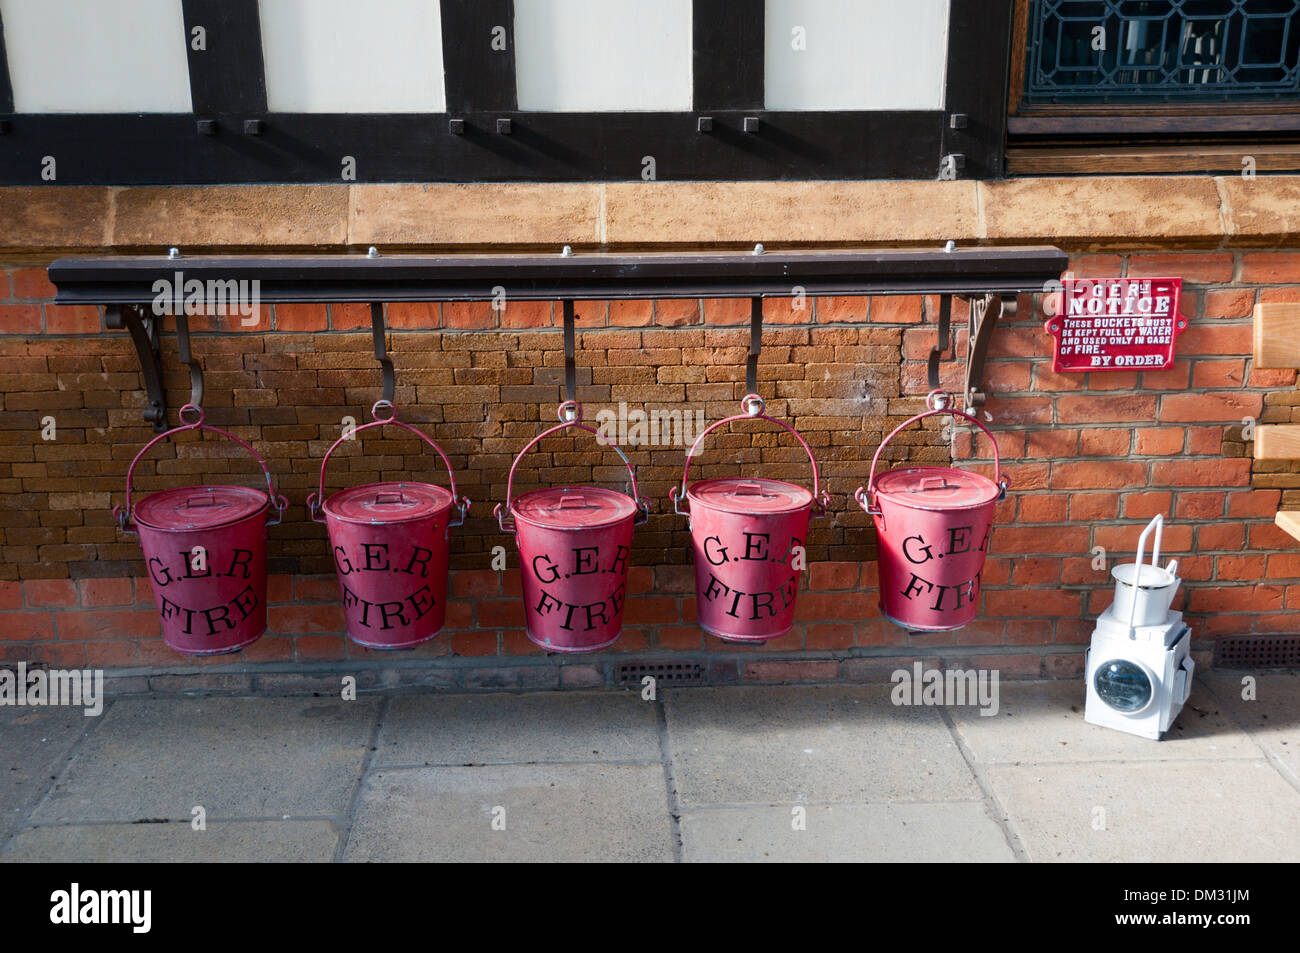 A line of 5 GER fire buckets with lids at Wolferton, the now closed 'Royal Station' for Sandringham in Norfolk. Stock Photo